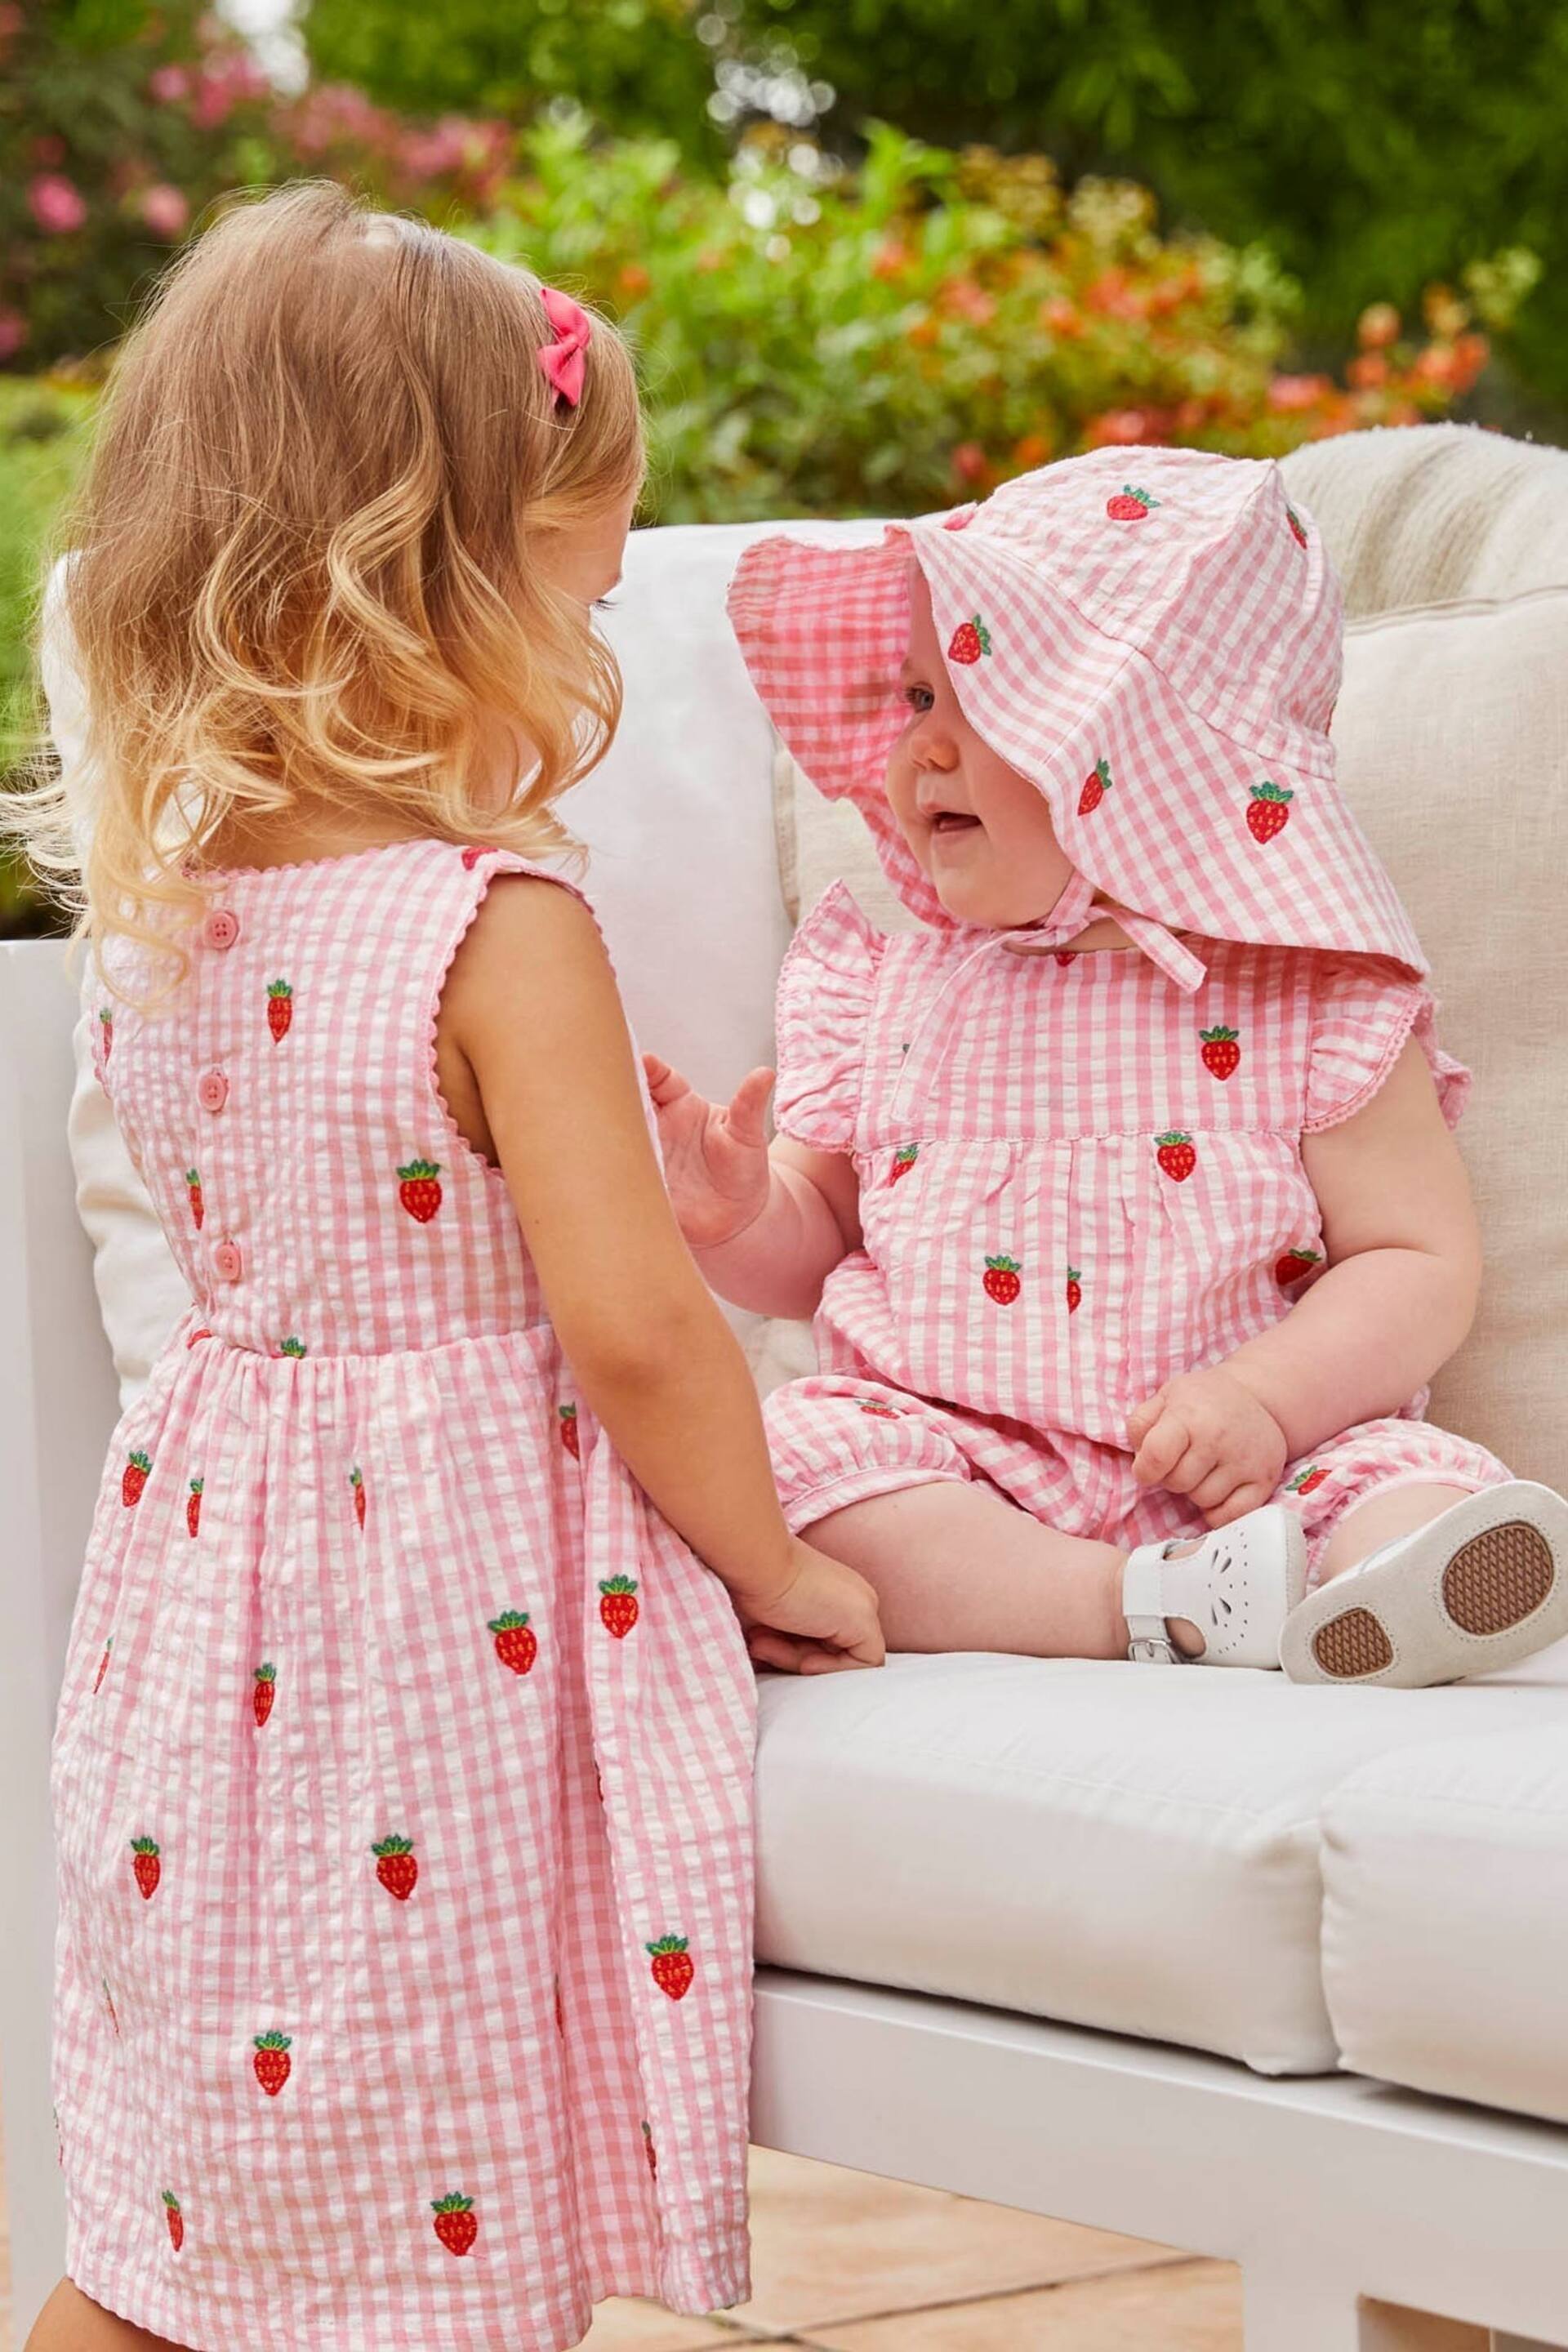 JoJo Maman Bébé Pink Gingham Strawberry Embroidered Pretty Sunsuit - Image 2 of 5